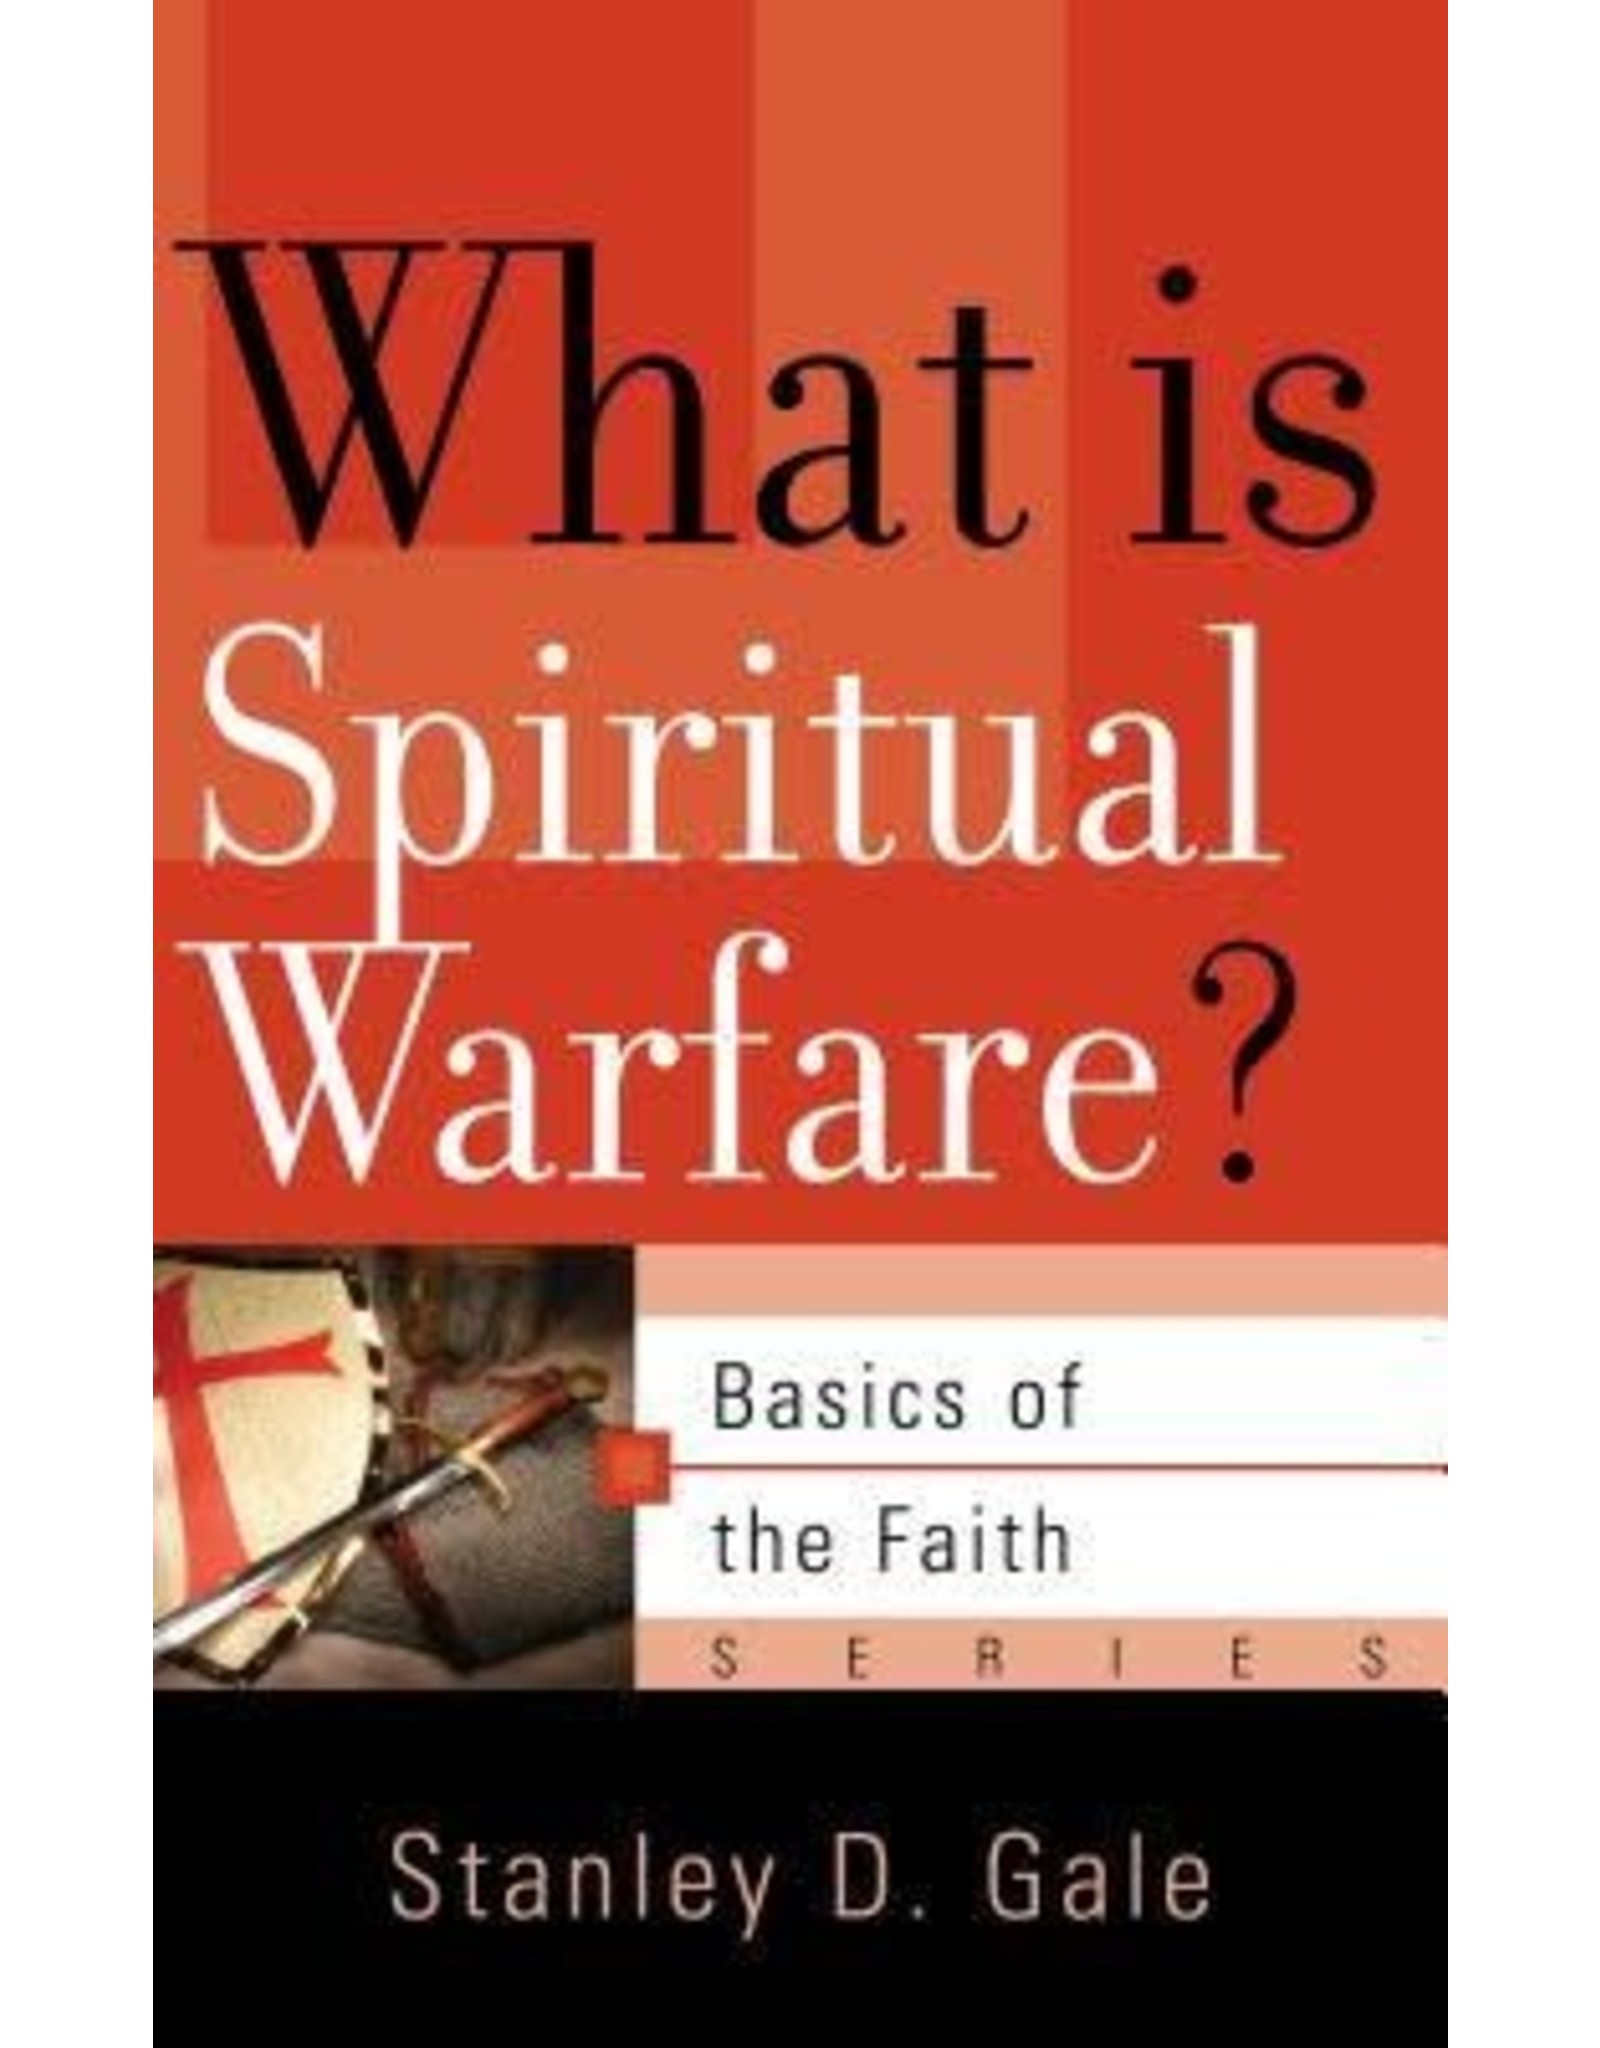 Stanley D Gale What is Spiritual Warfare?